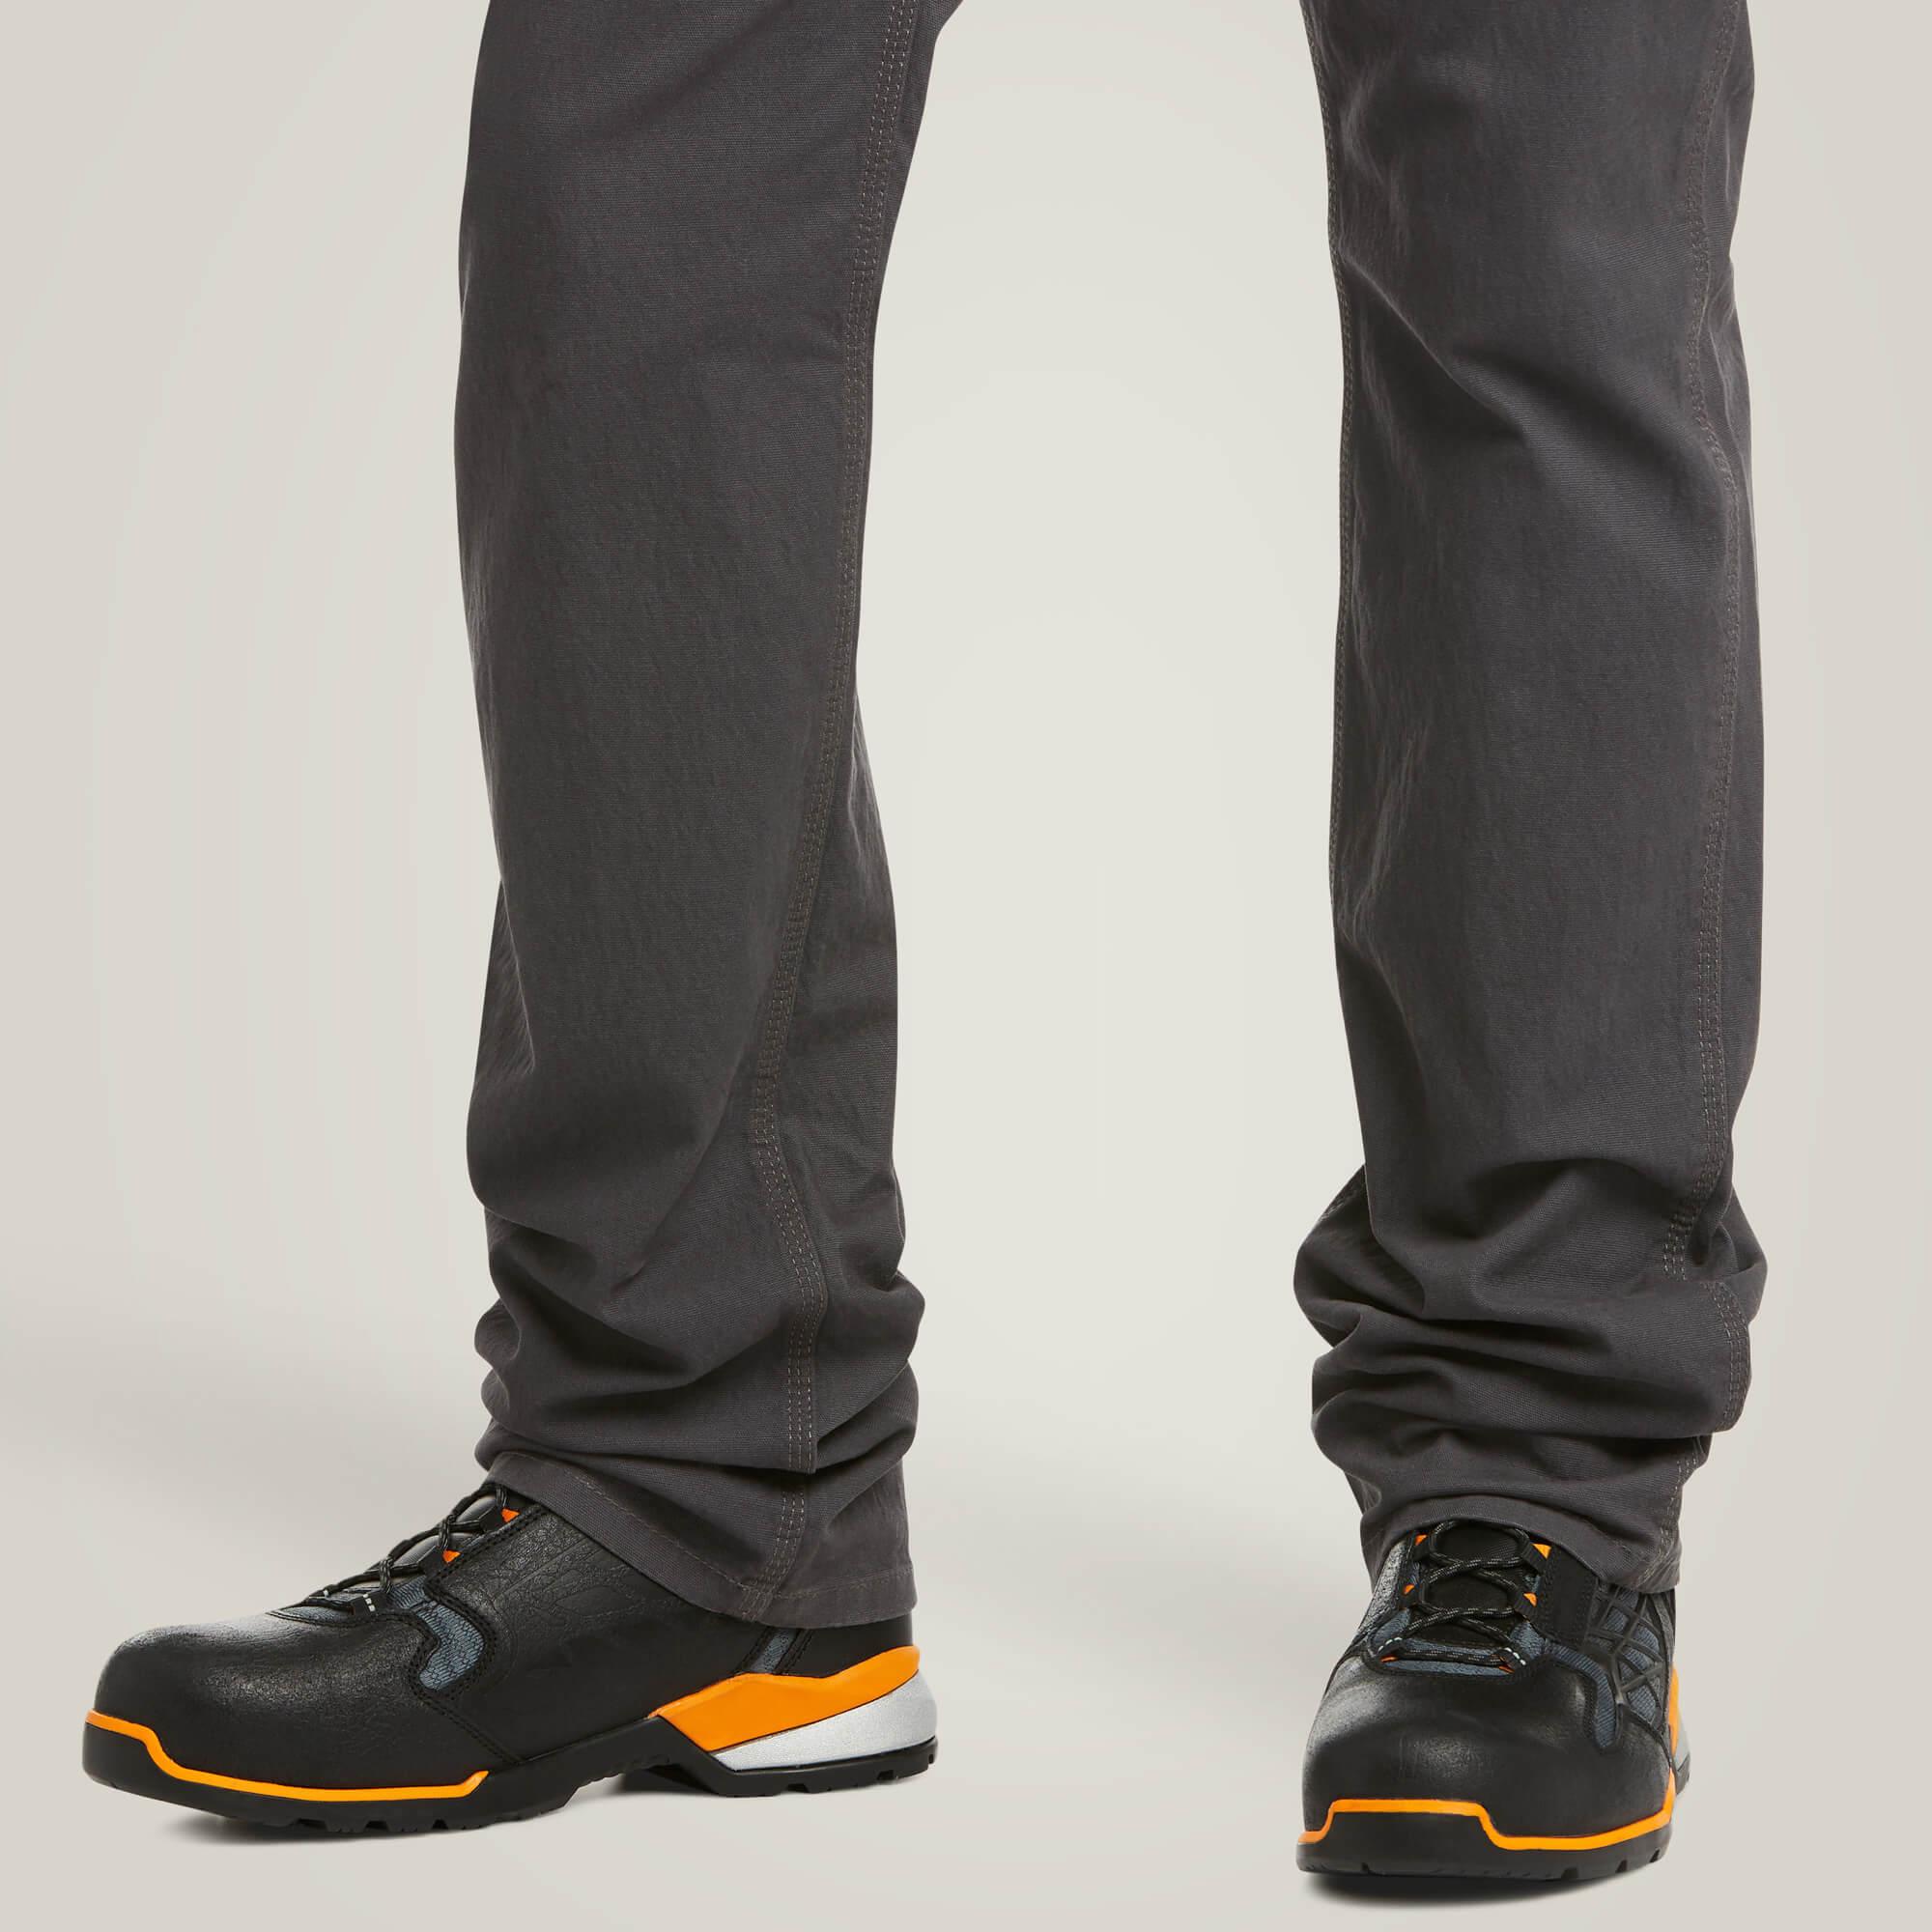 Rebar M4 Low Rise DuraStretch Made Tough Stackable Straight Leg Pant - Purpose-Built / Home of the Trades